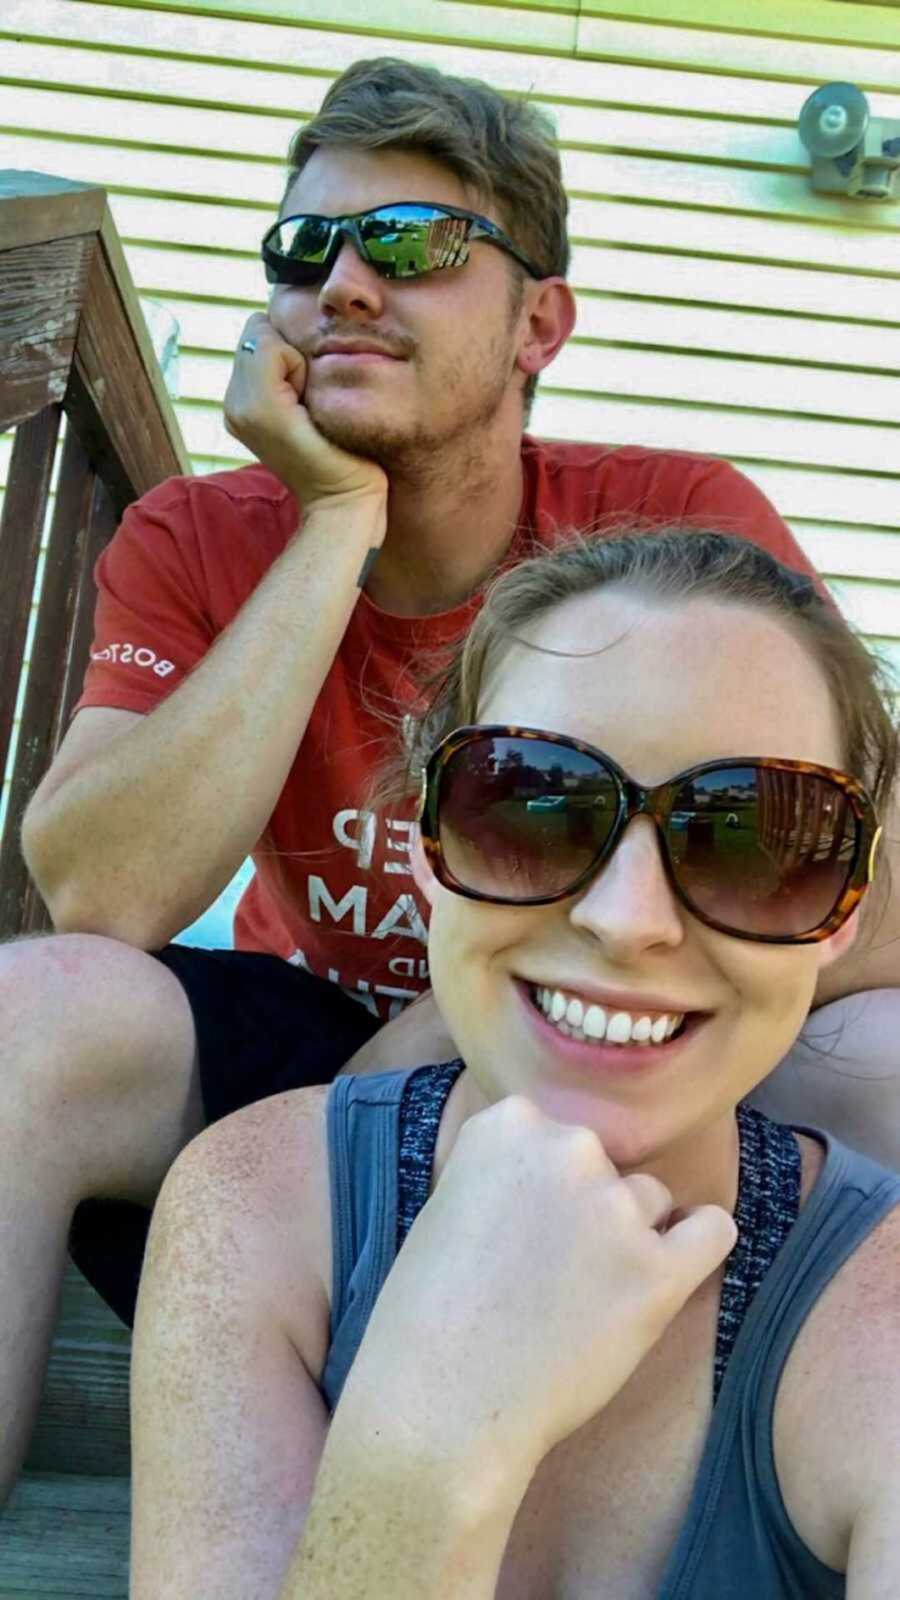 Wife sits on stair below husband and takes a selfie while both are smiling